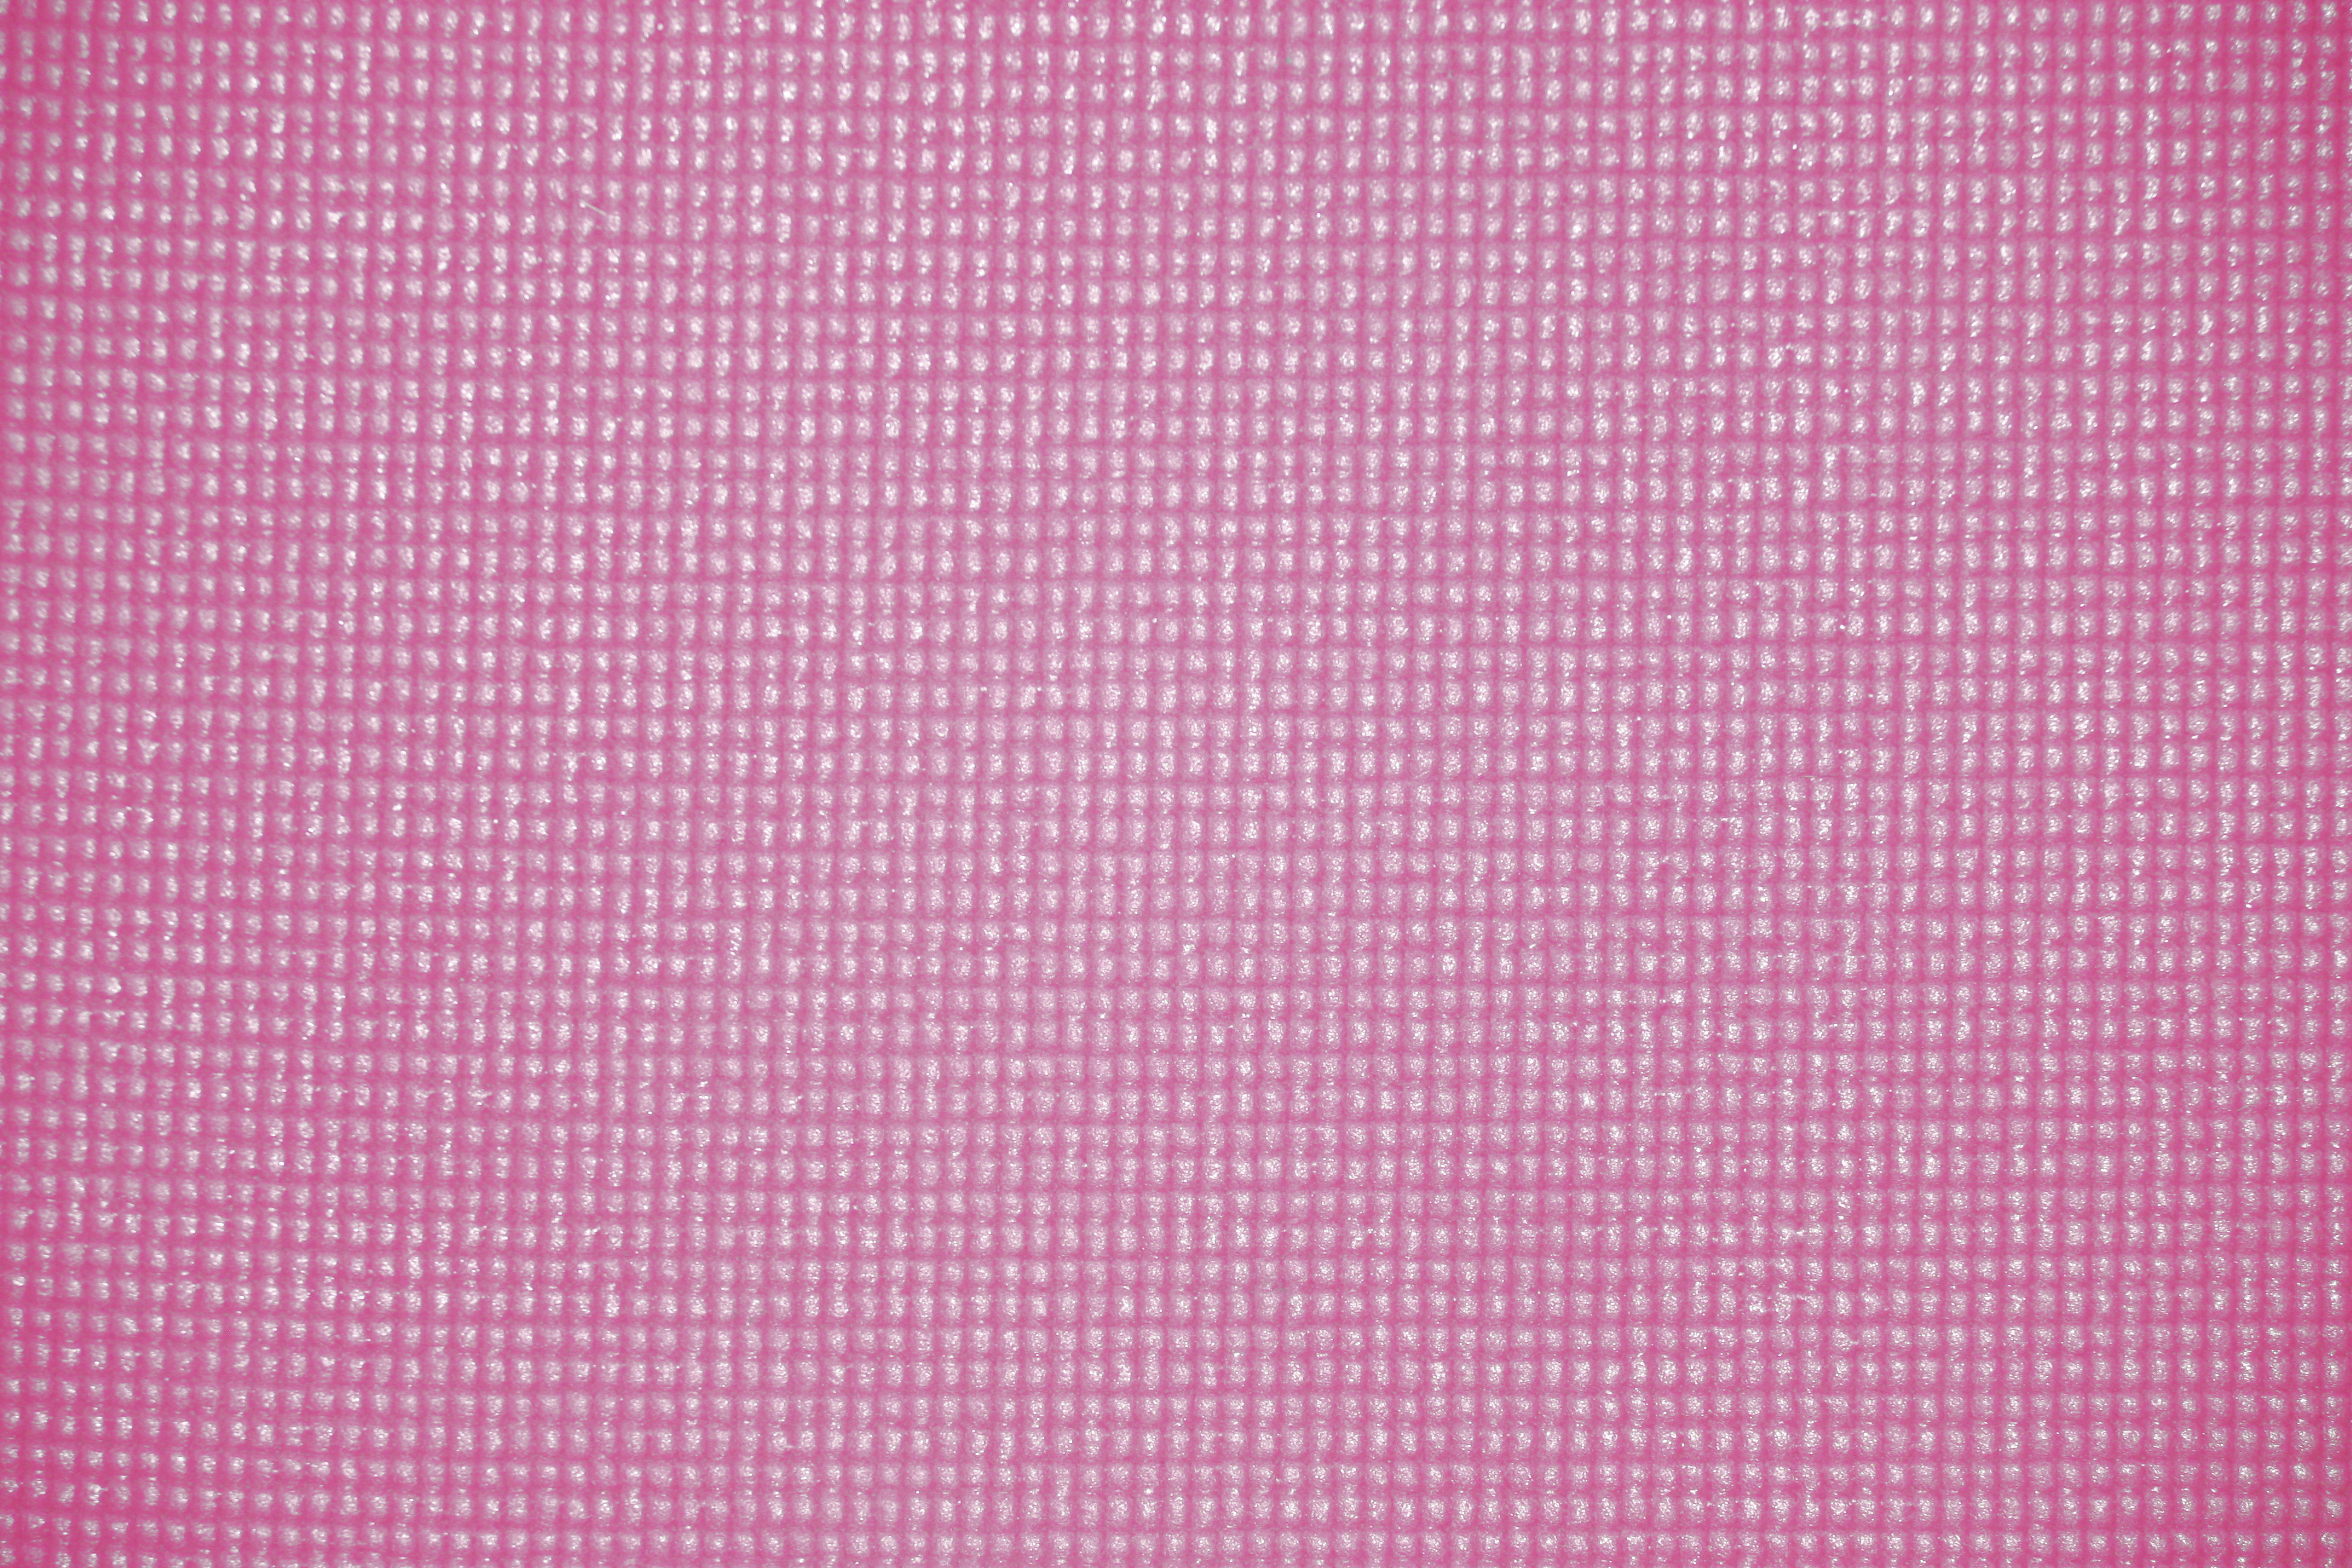 Pink Yoga Mat With White Background Stock Photo, Picture and Royalty Free  Image. Image 16248433.